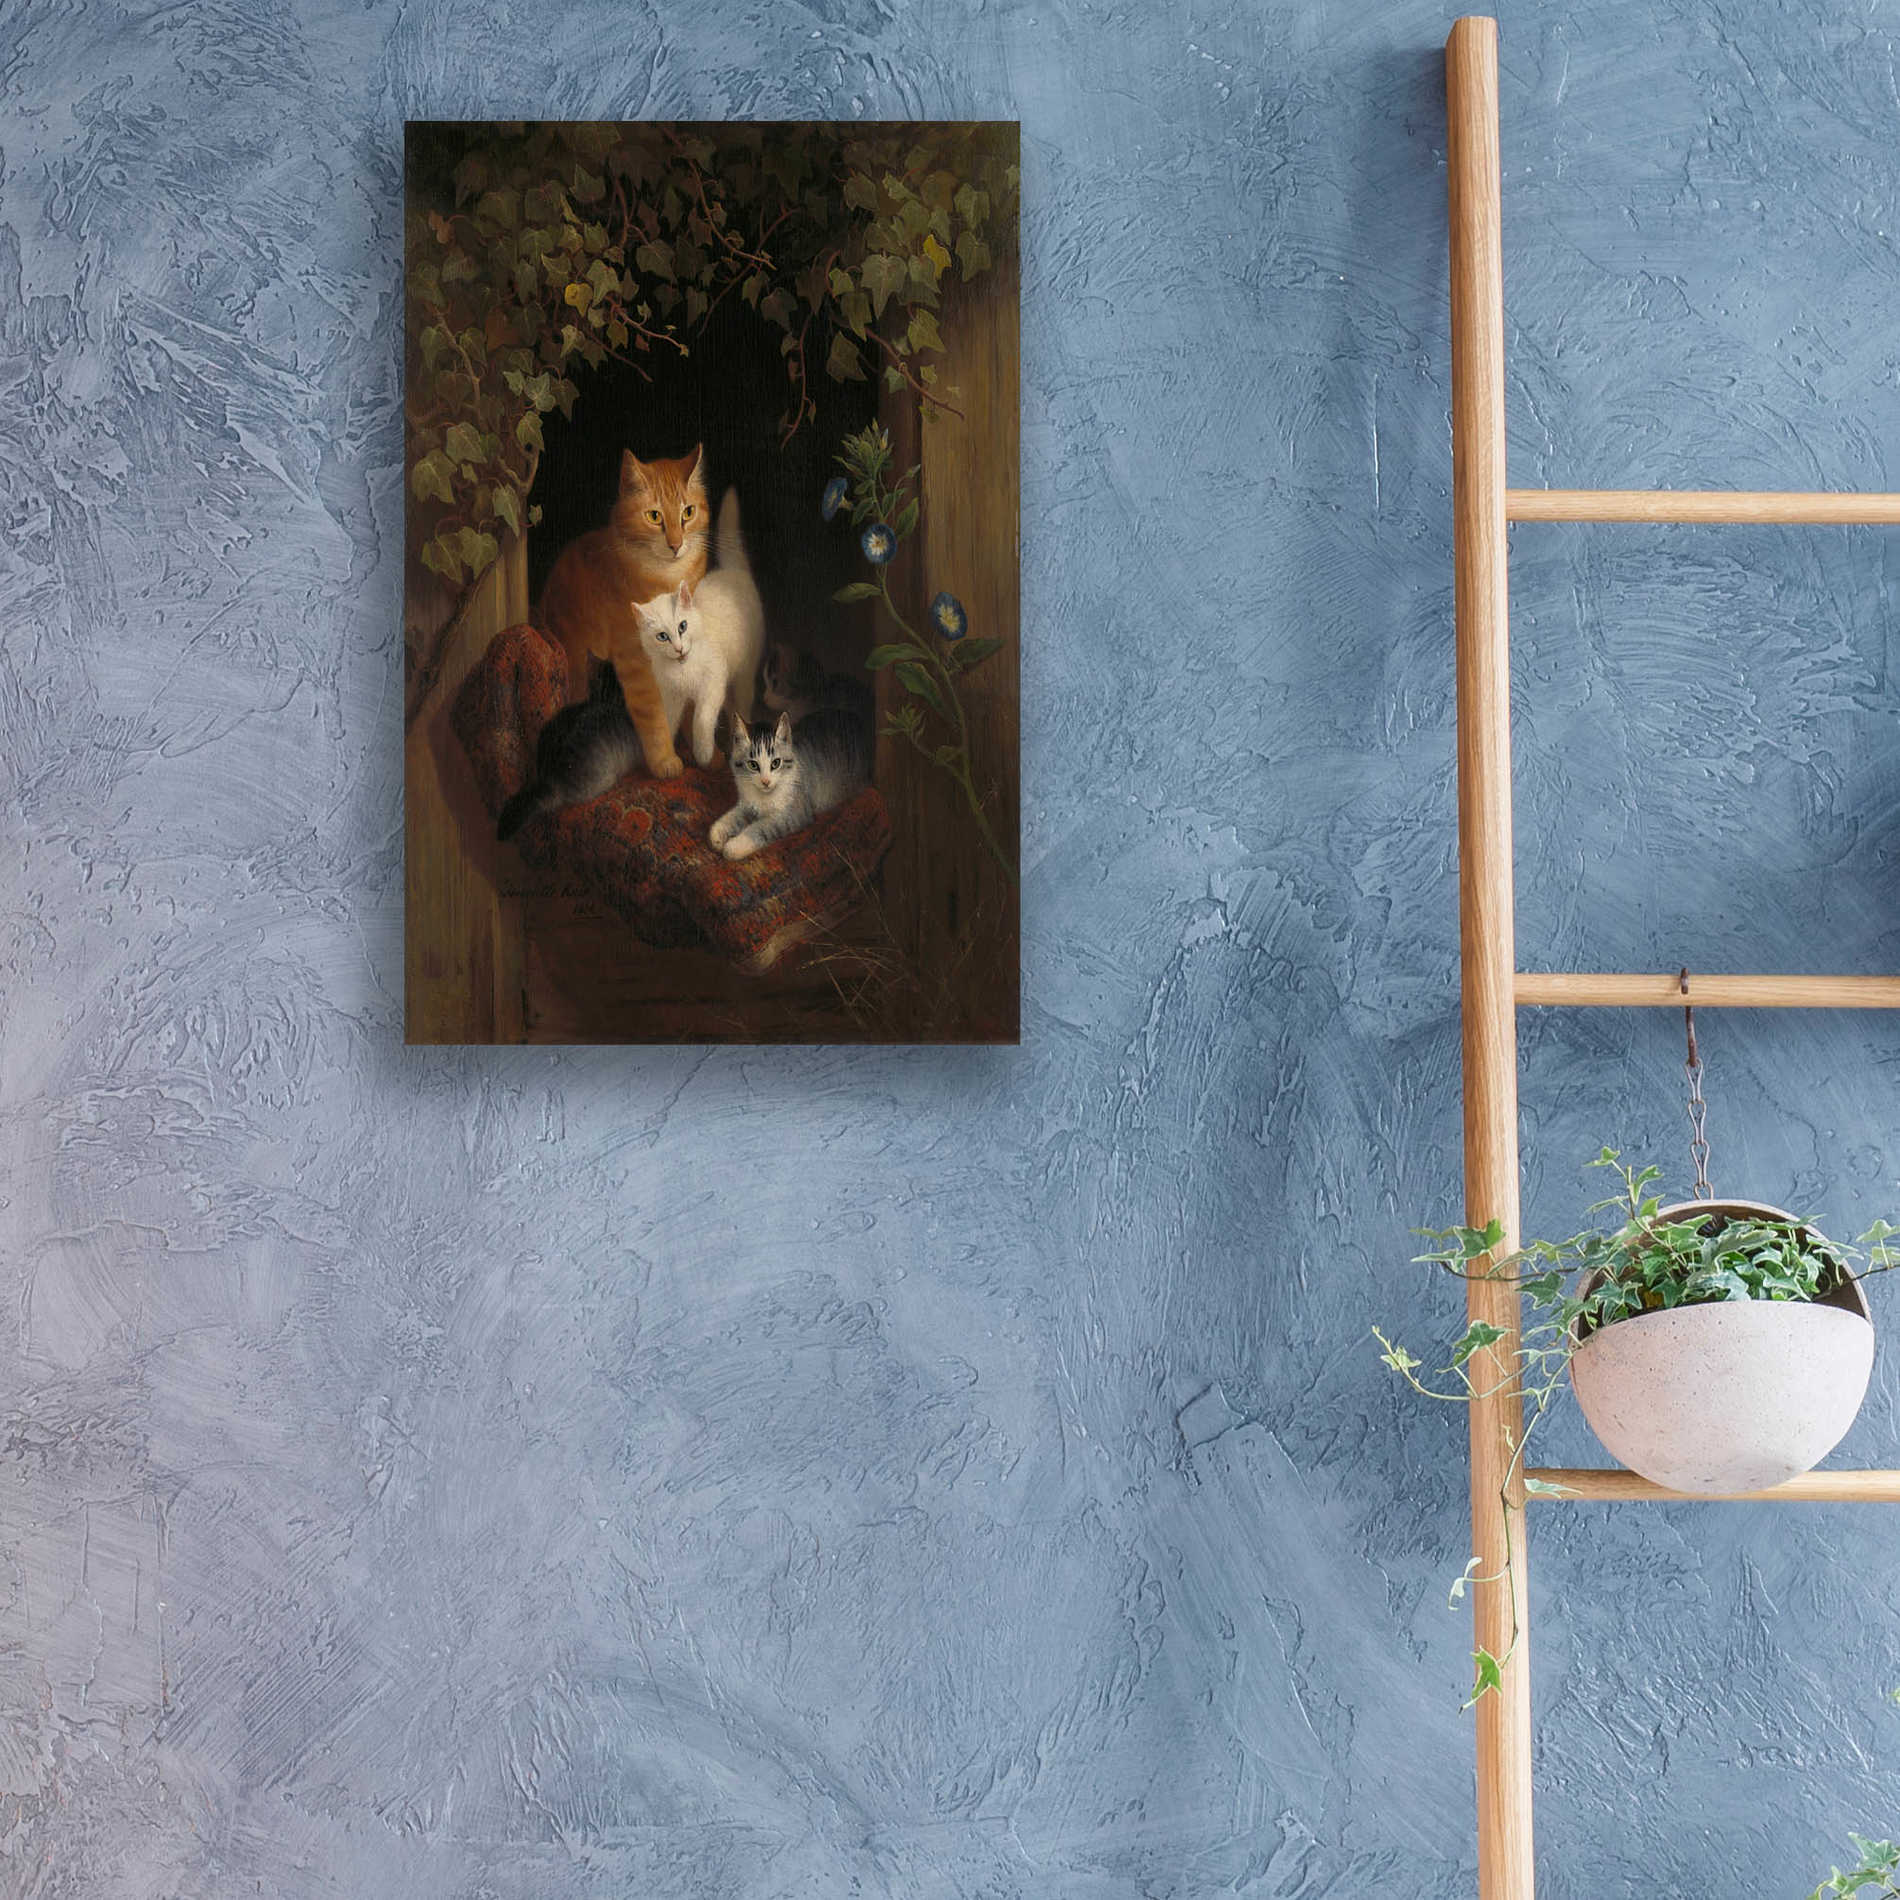 Epic Art 'Cat with Kittens' by Henriette Ronner-Knip, Acrylic Glass Wall Art,16x24